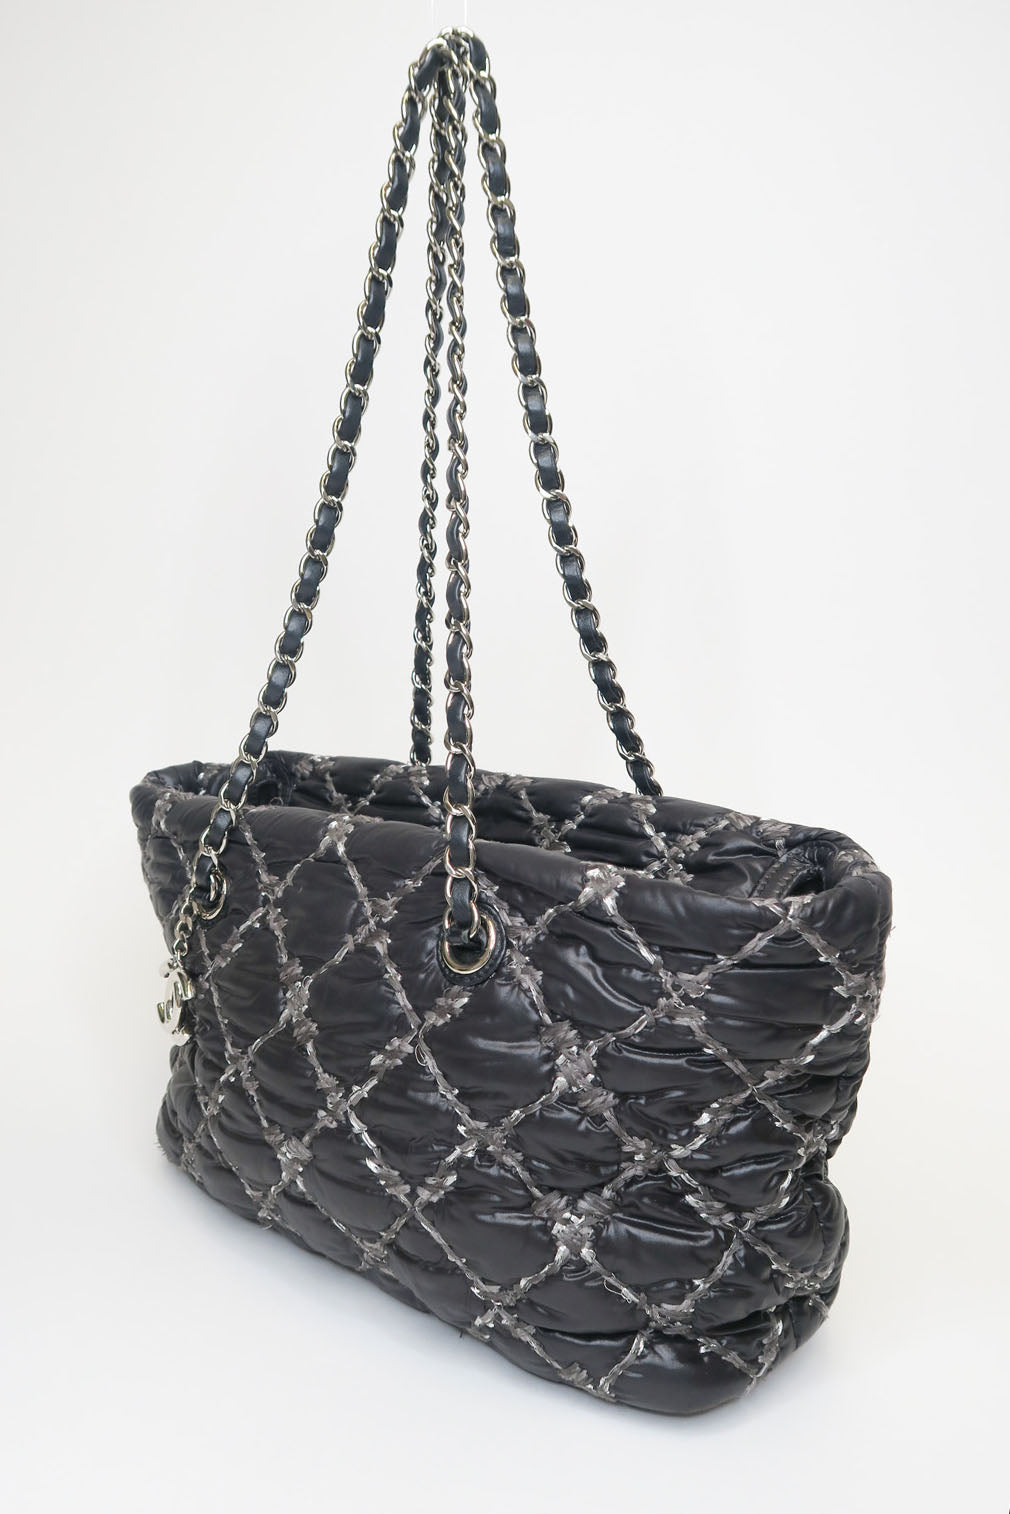 Chanel Tweed on Stitch Zip Tote Quilted Nylon Small